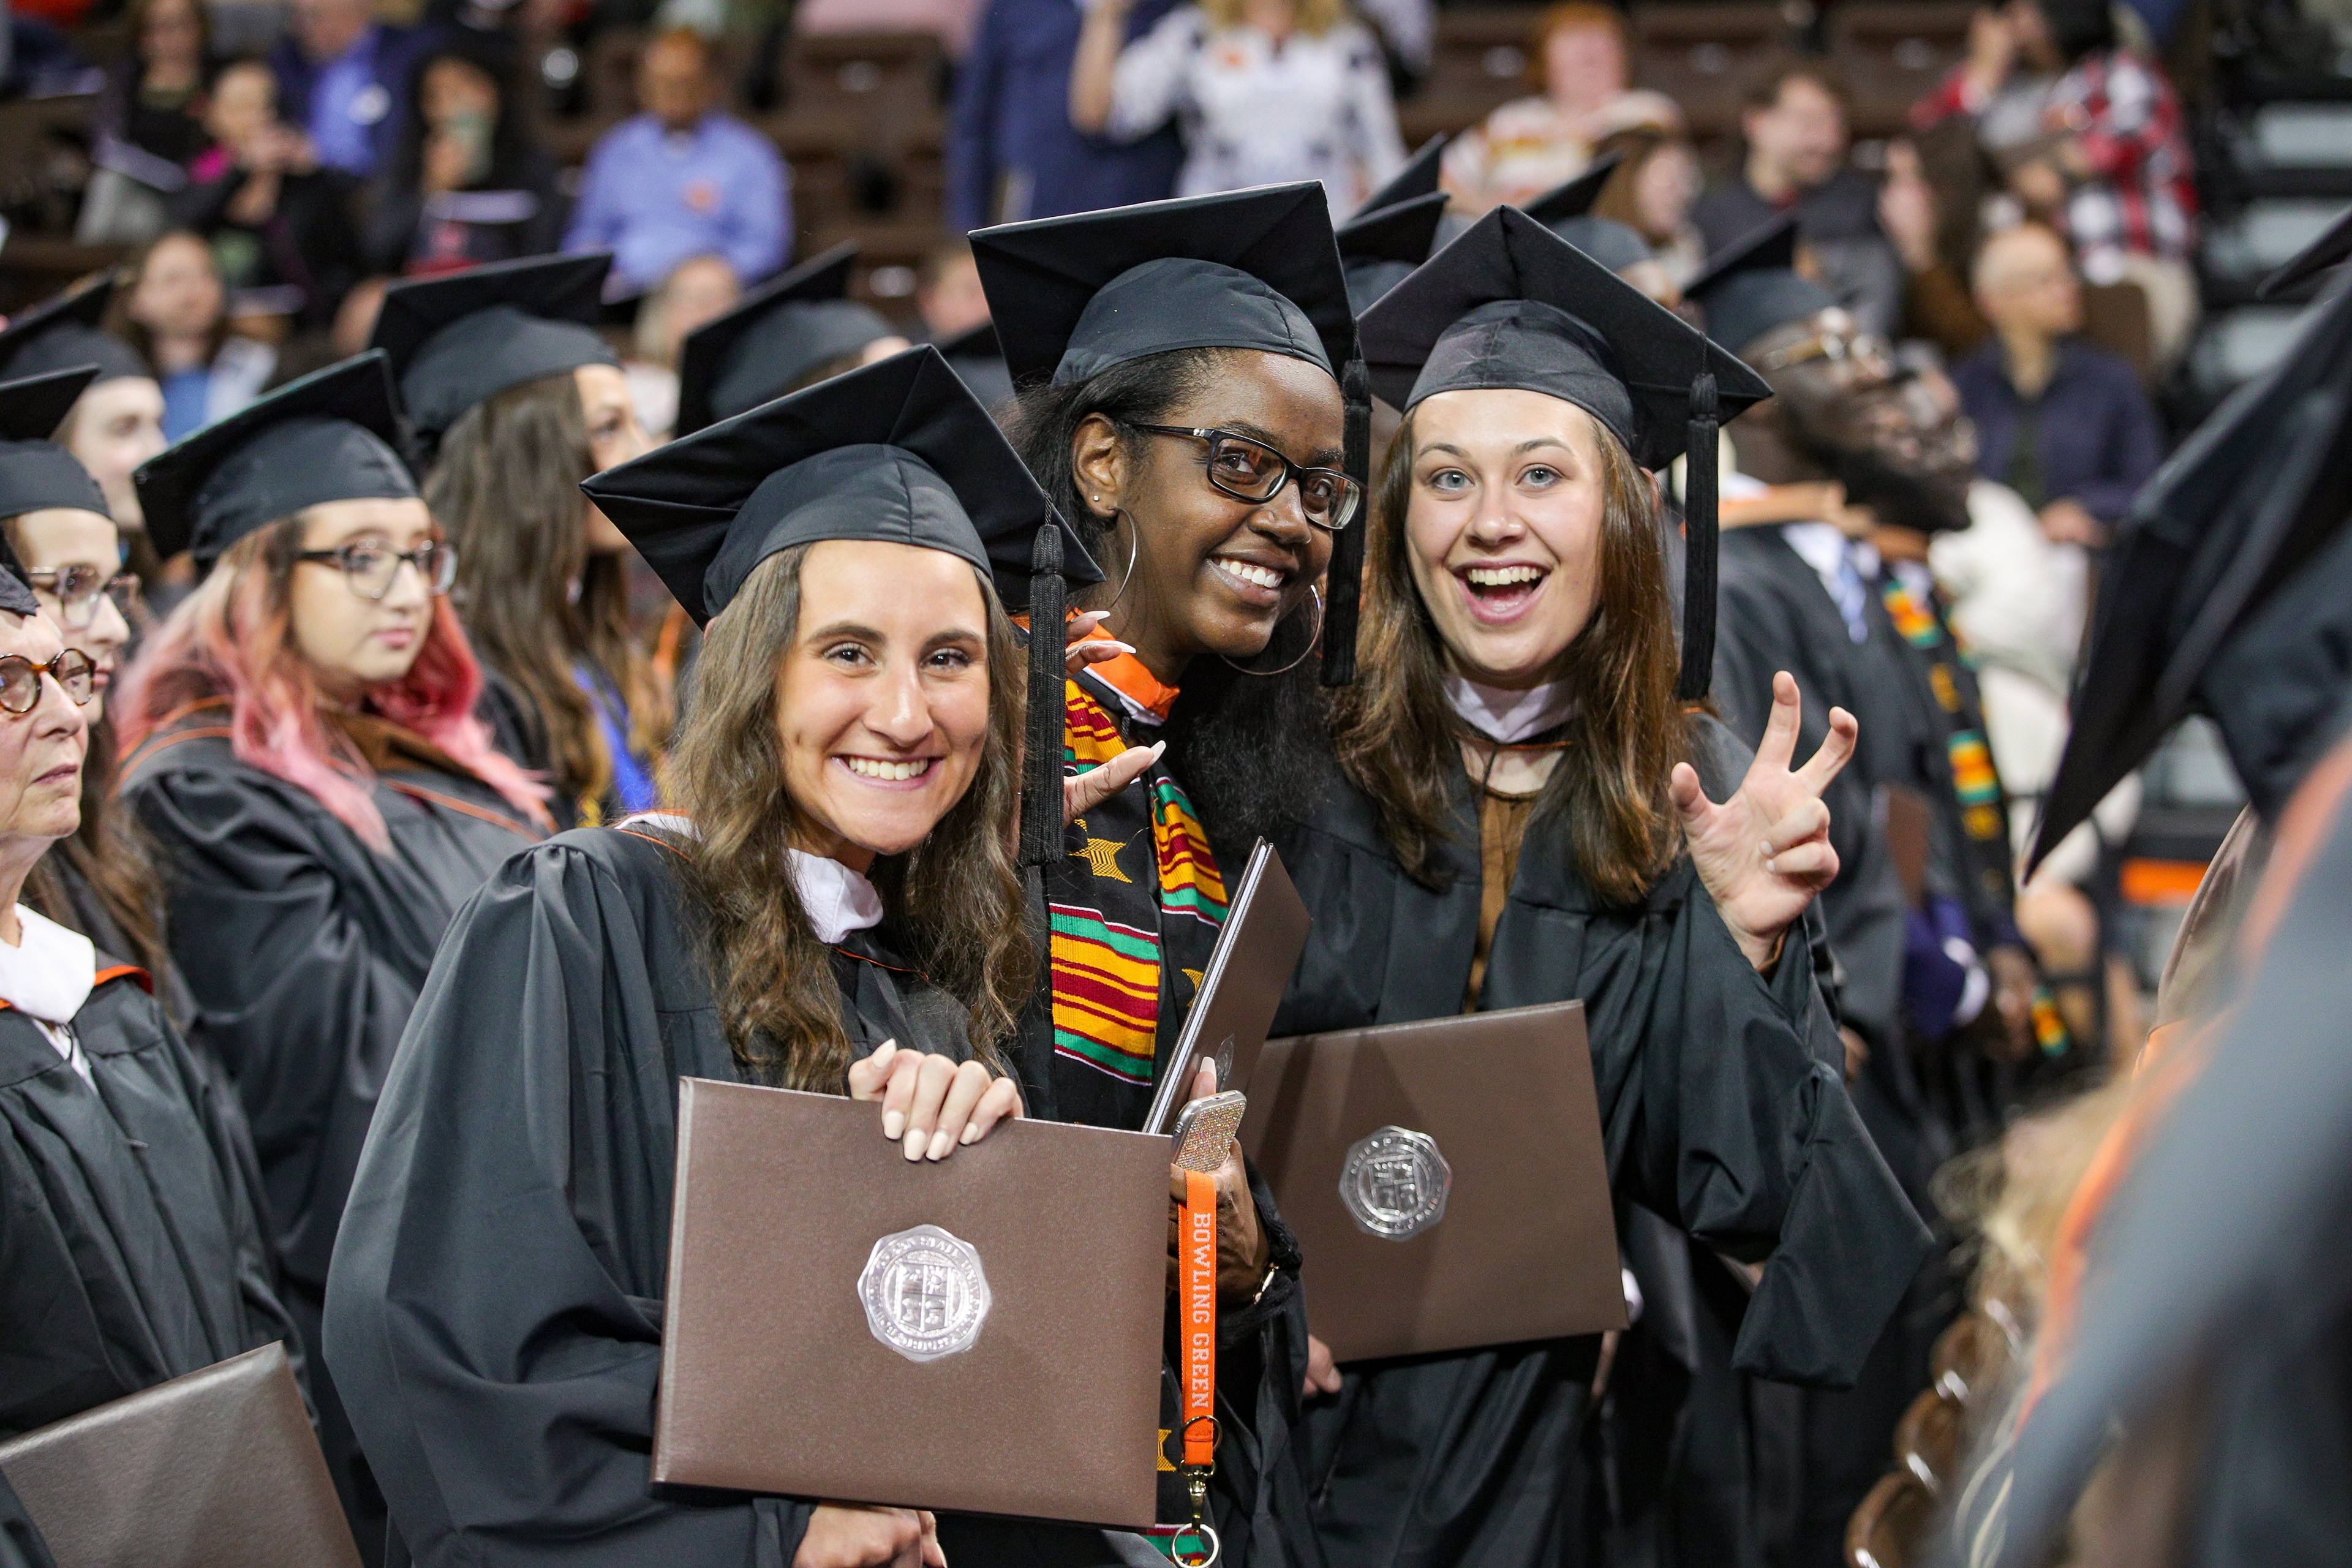 Three BGSU graduates show their diploma covers and give talons up sign